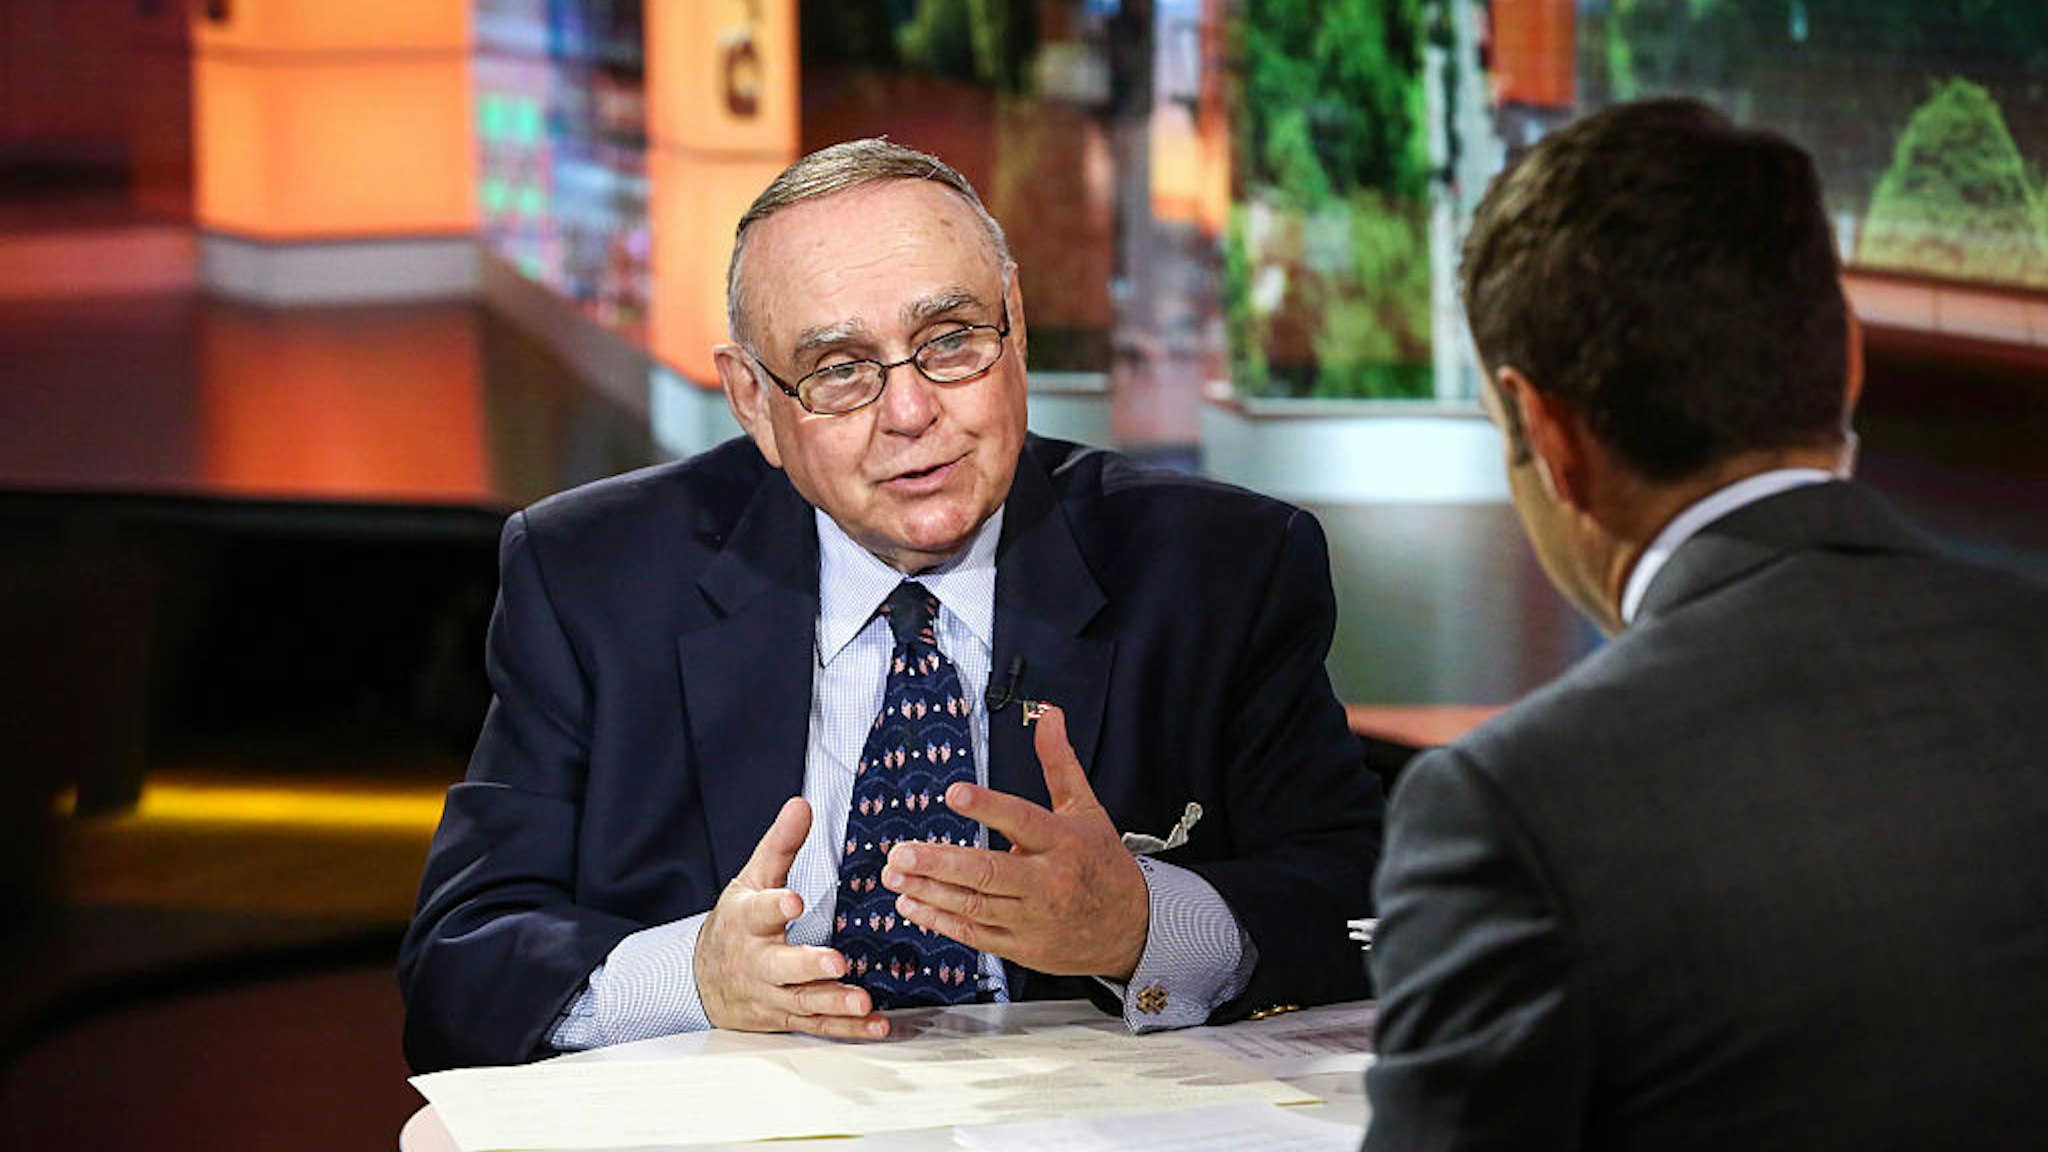 Leon Cooperman, chief executive officer of Omega Advisors Inc., speaks during an interview in New York, U.S., on Tuesday, Oct. 11, 2016.